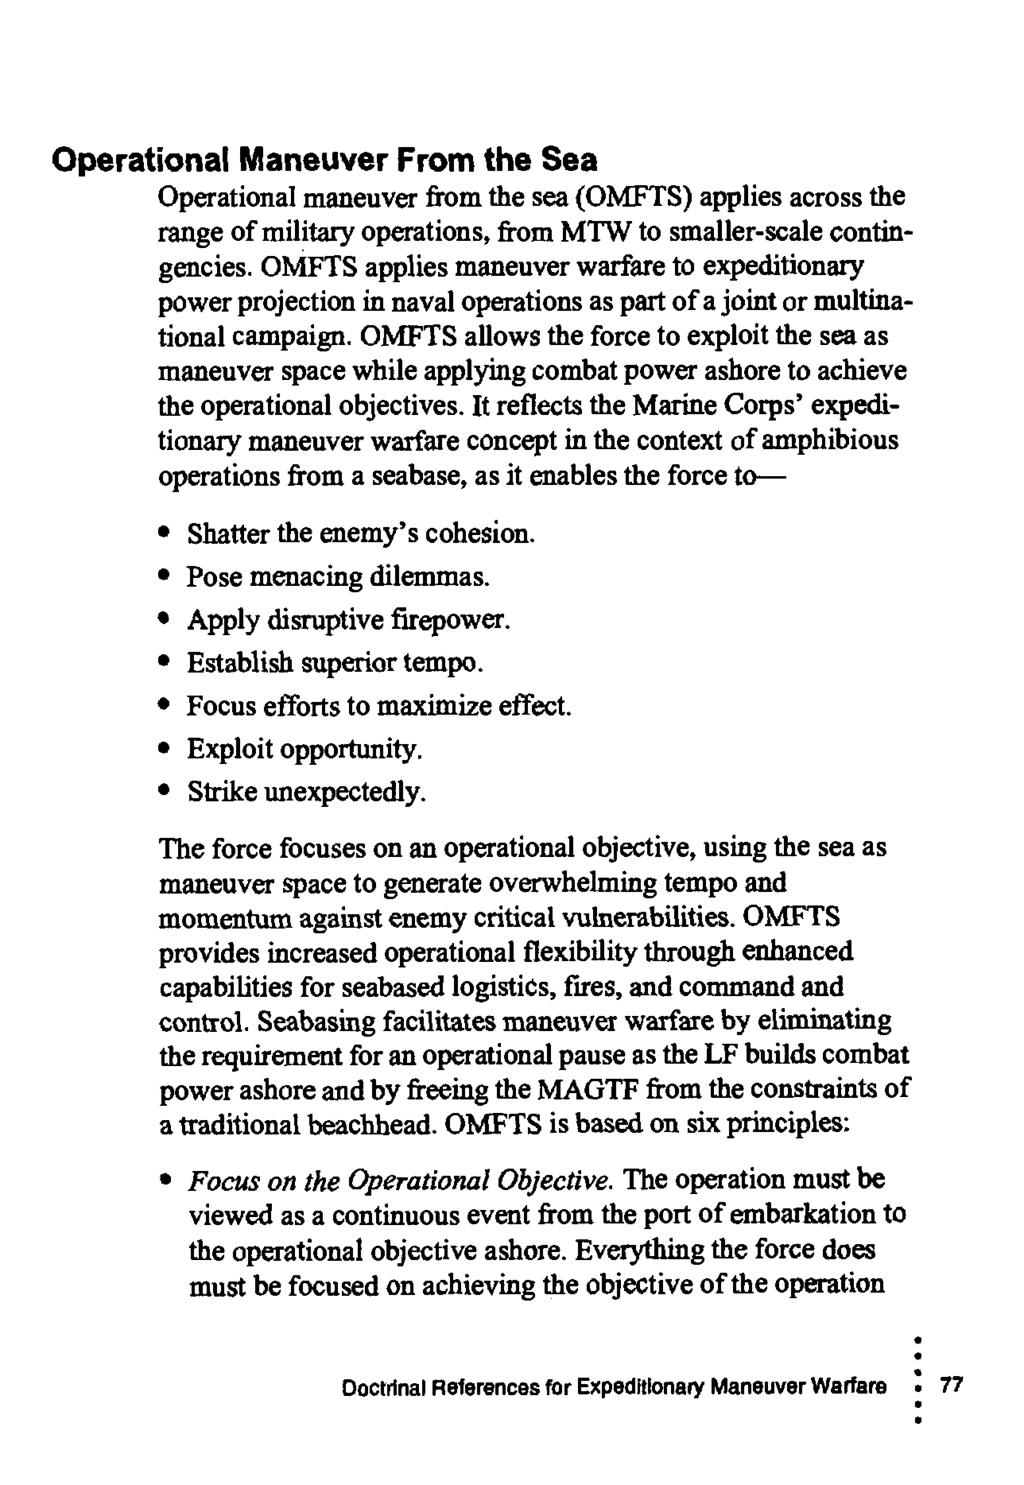 Operational Maneuver From the Sea Operational maneuver from the sea (OMFTS) applies across the range of military operations, from MTW to smaller-scale contingencies.